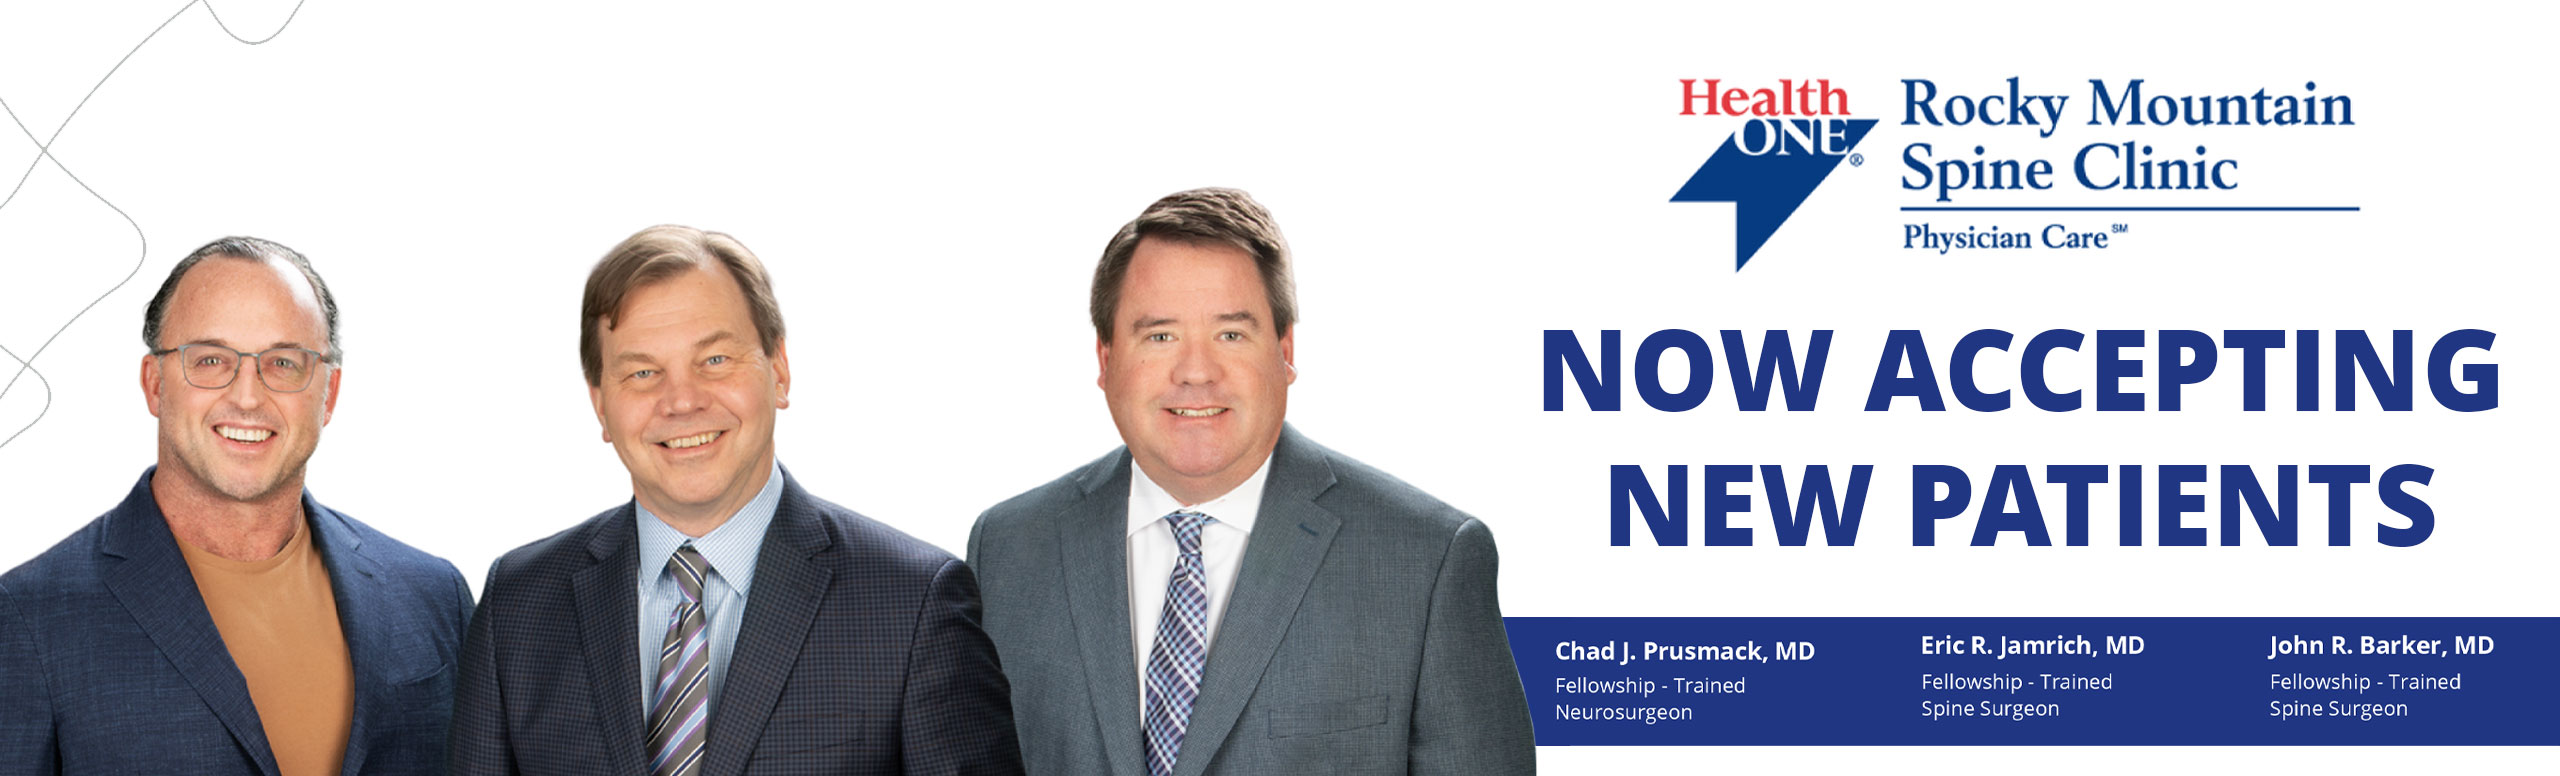 Rocky Mountain Spine Clinic Physician Care

Now Accepting New Patients 

Chad J. Prusmack, MD
Fellowship - Trained Neurosurgeon


Eric R. Jamrich, MD
Fellowship - Trained 
Spine Surgeon

John R. Barker, MD
Fellowship - Trained
Spine Surgeon